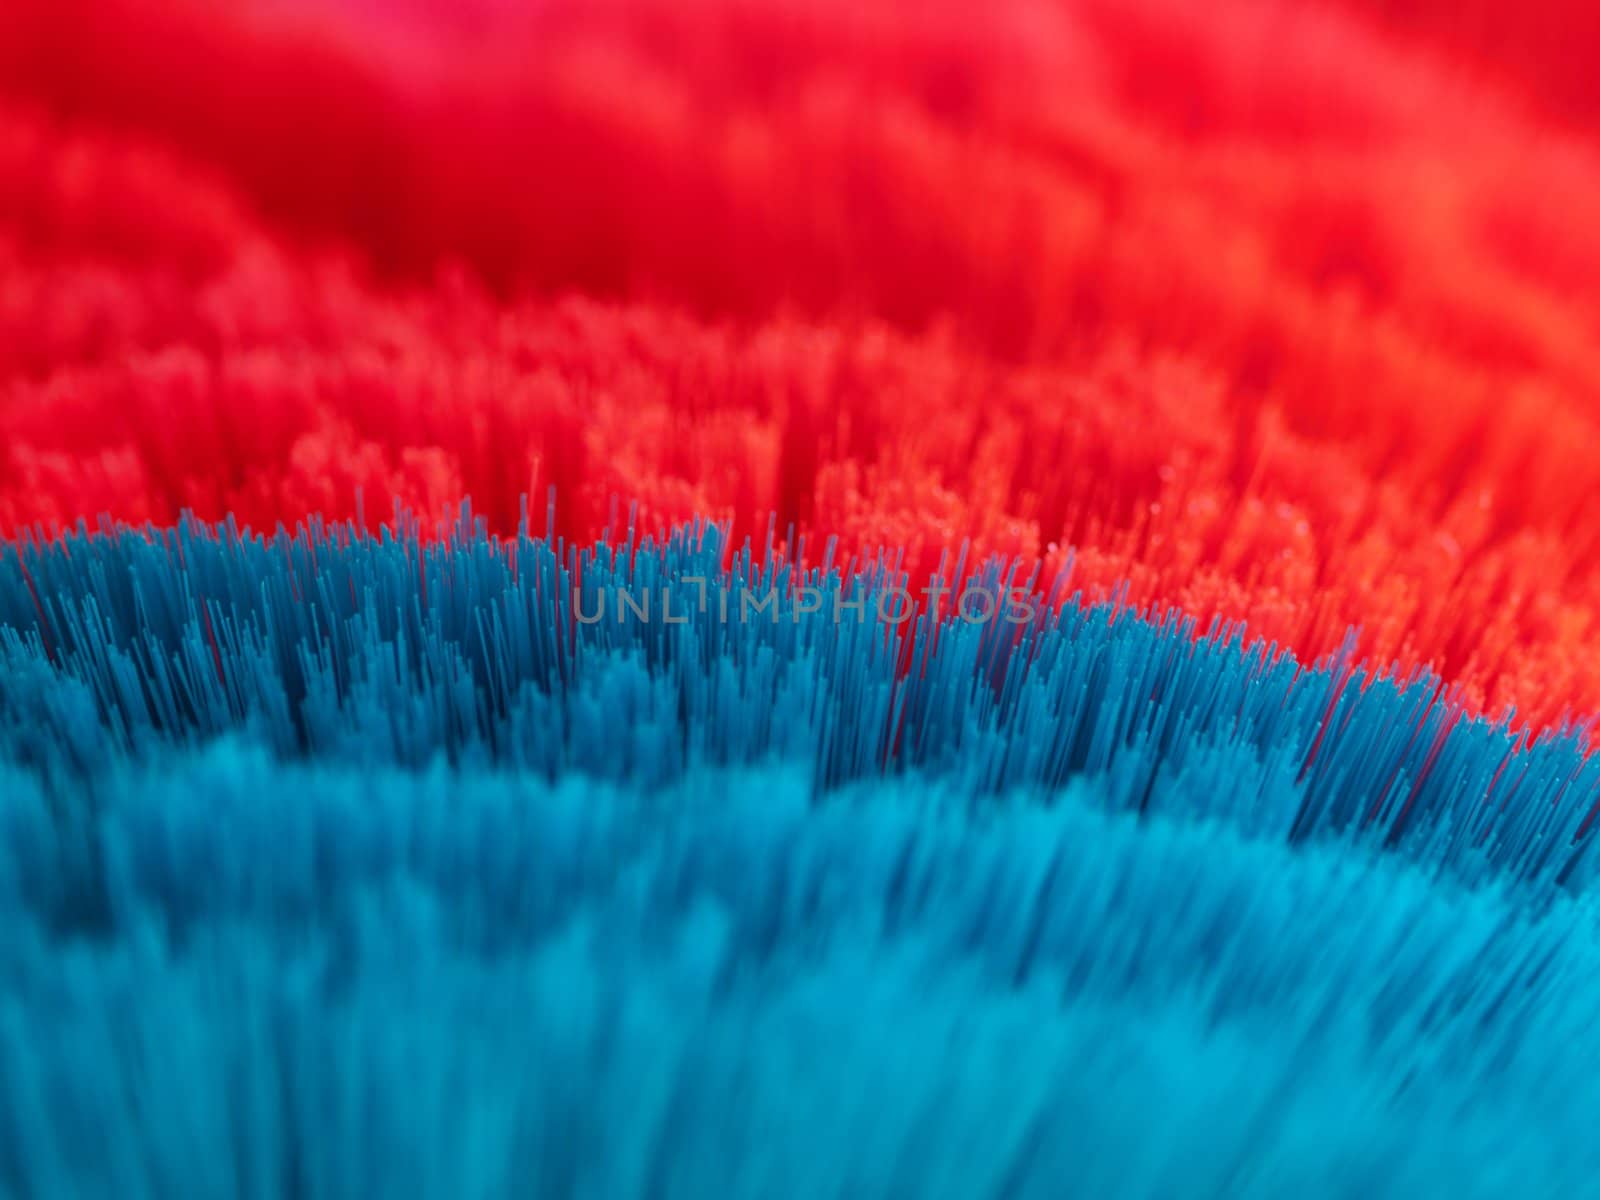 Macro of red and blue cleaning brushes